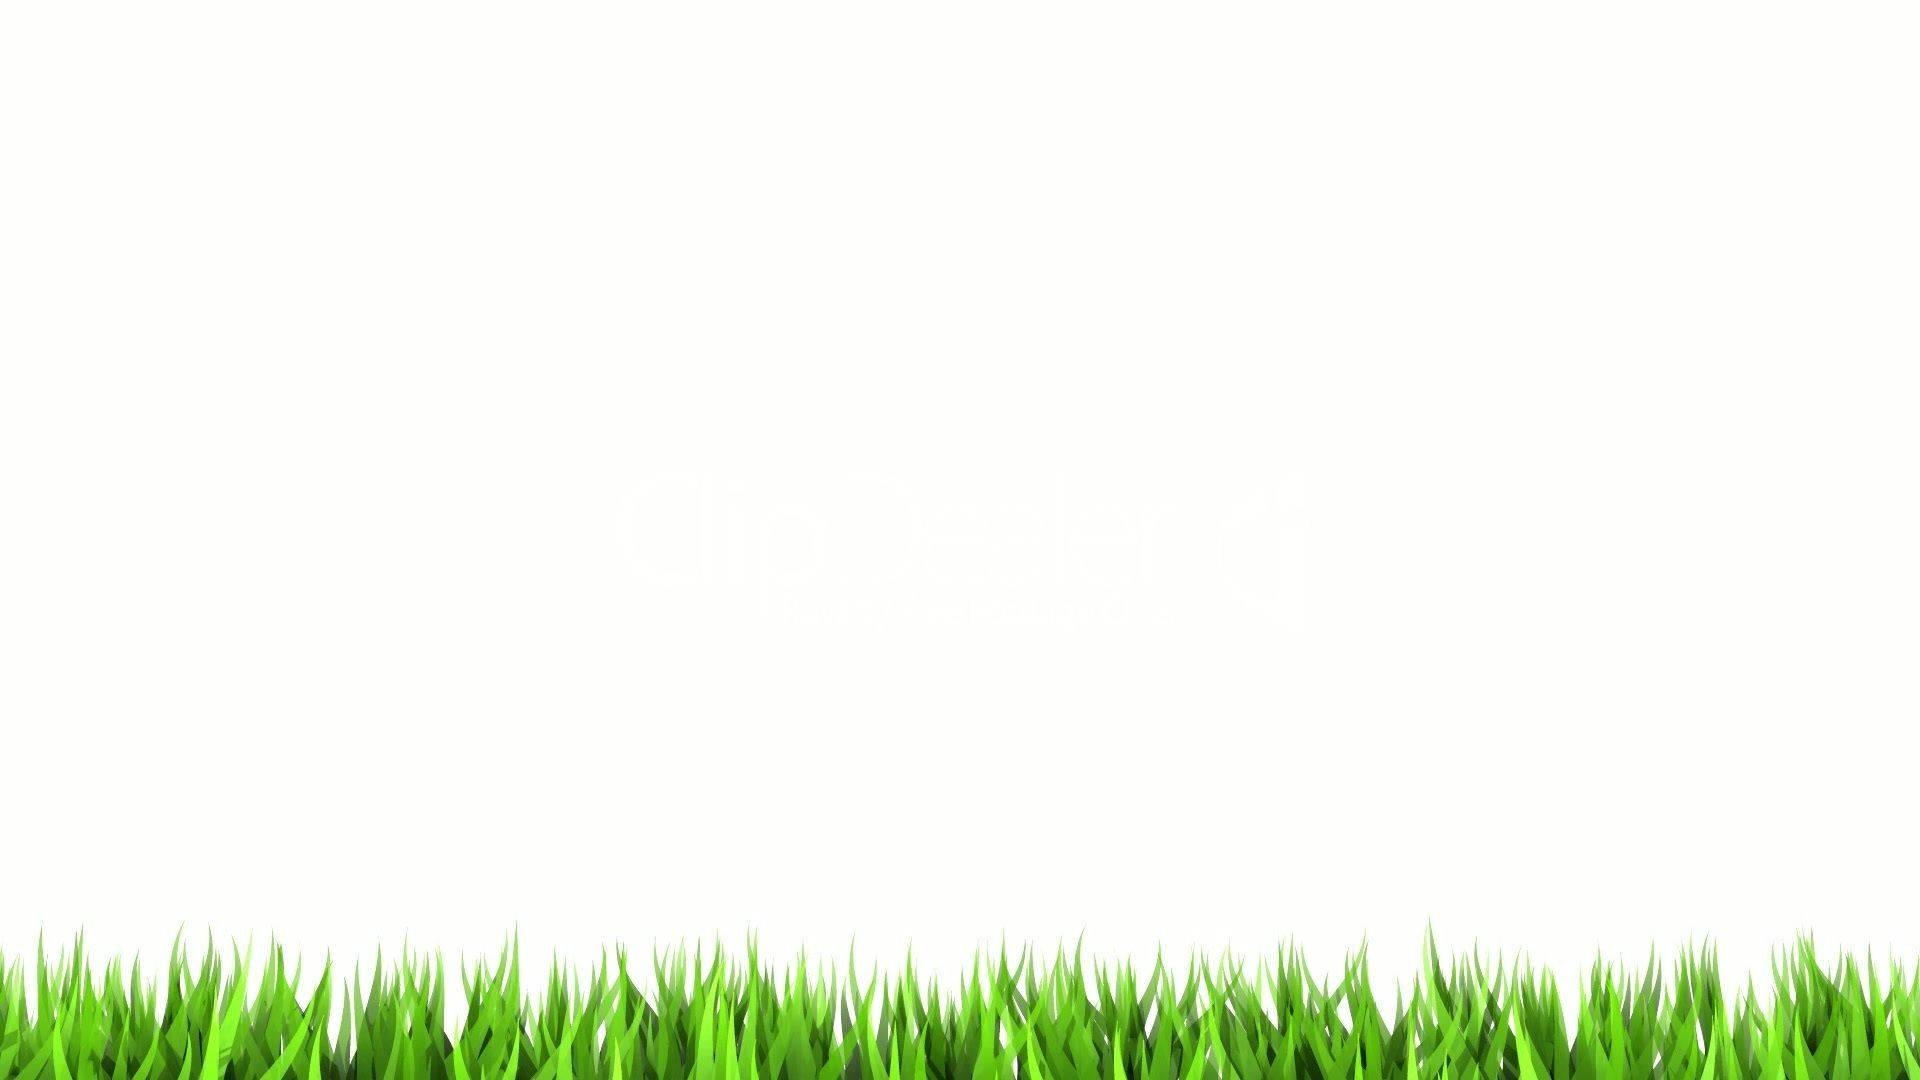 Blank White With Grass Background